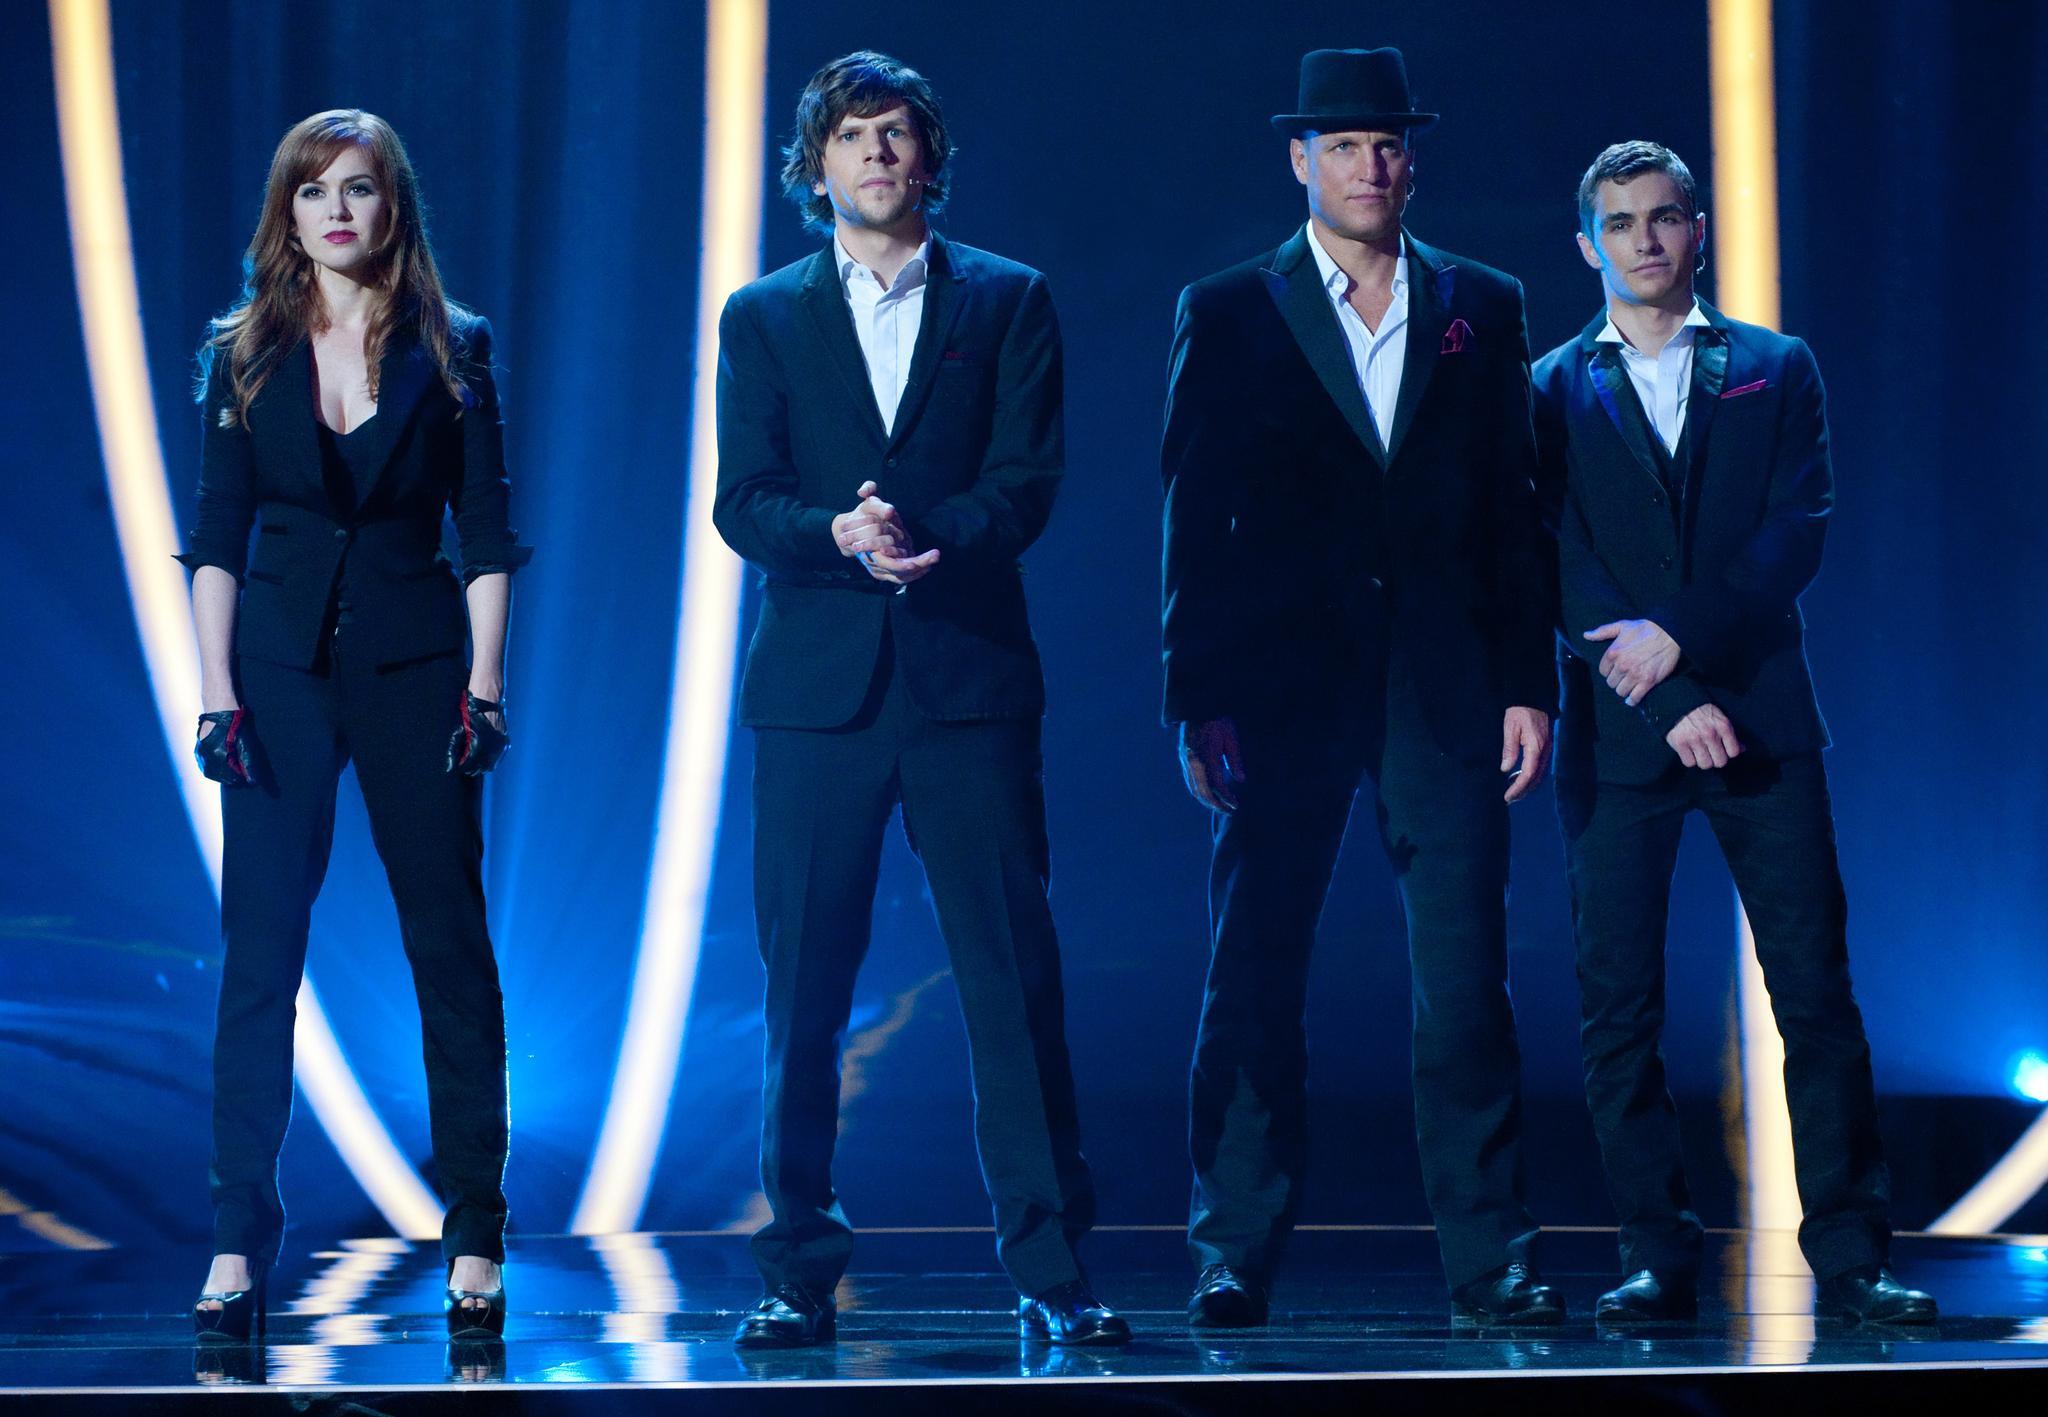 NOW YOU SEE ME 2 